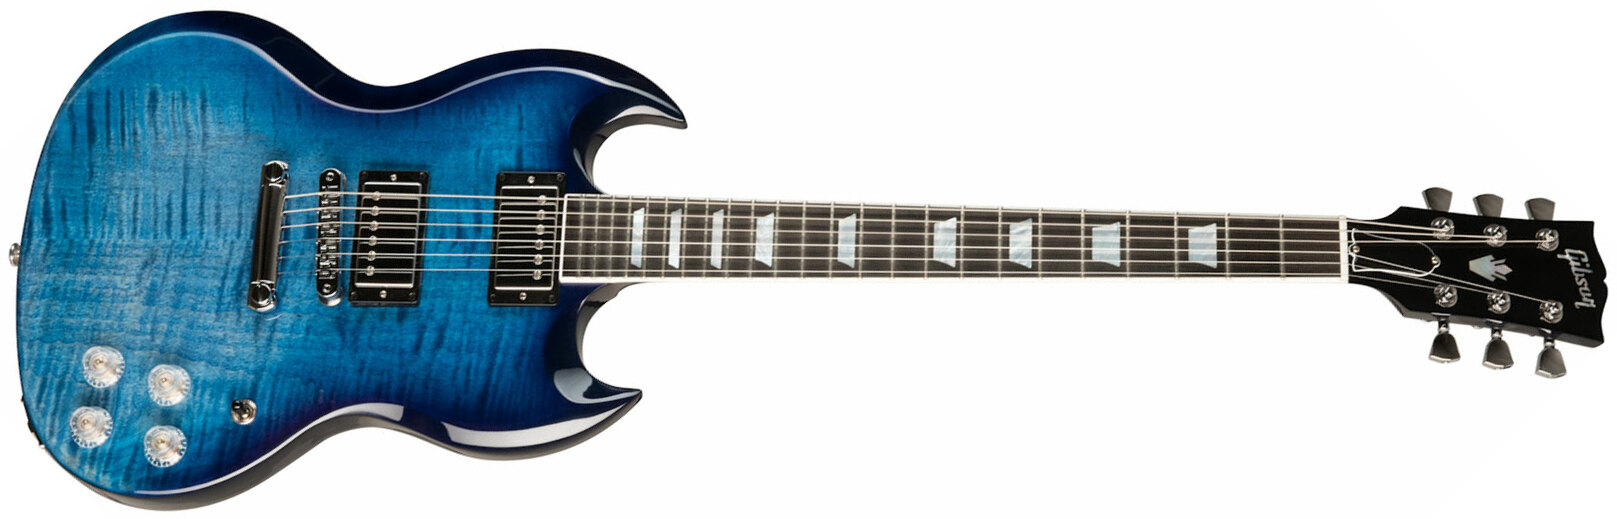 Gibson Sg Modern Modern 2h Ht Eb - Blueberry Fade - Double cut electric guitar - Main picture